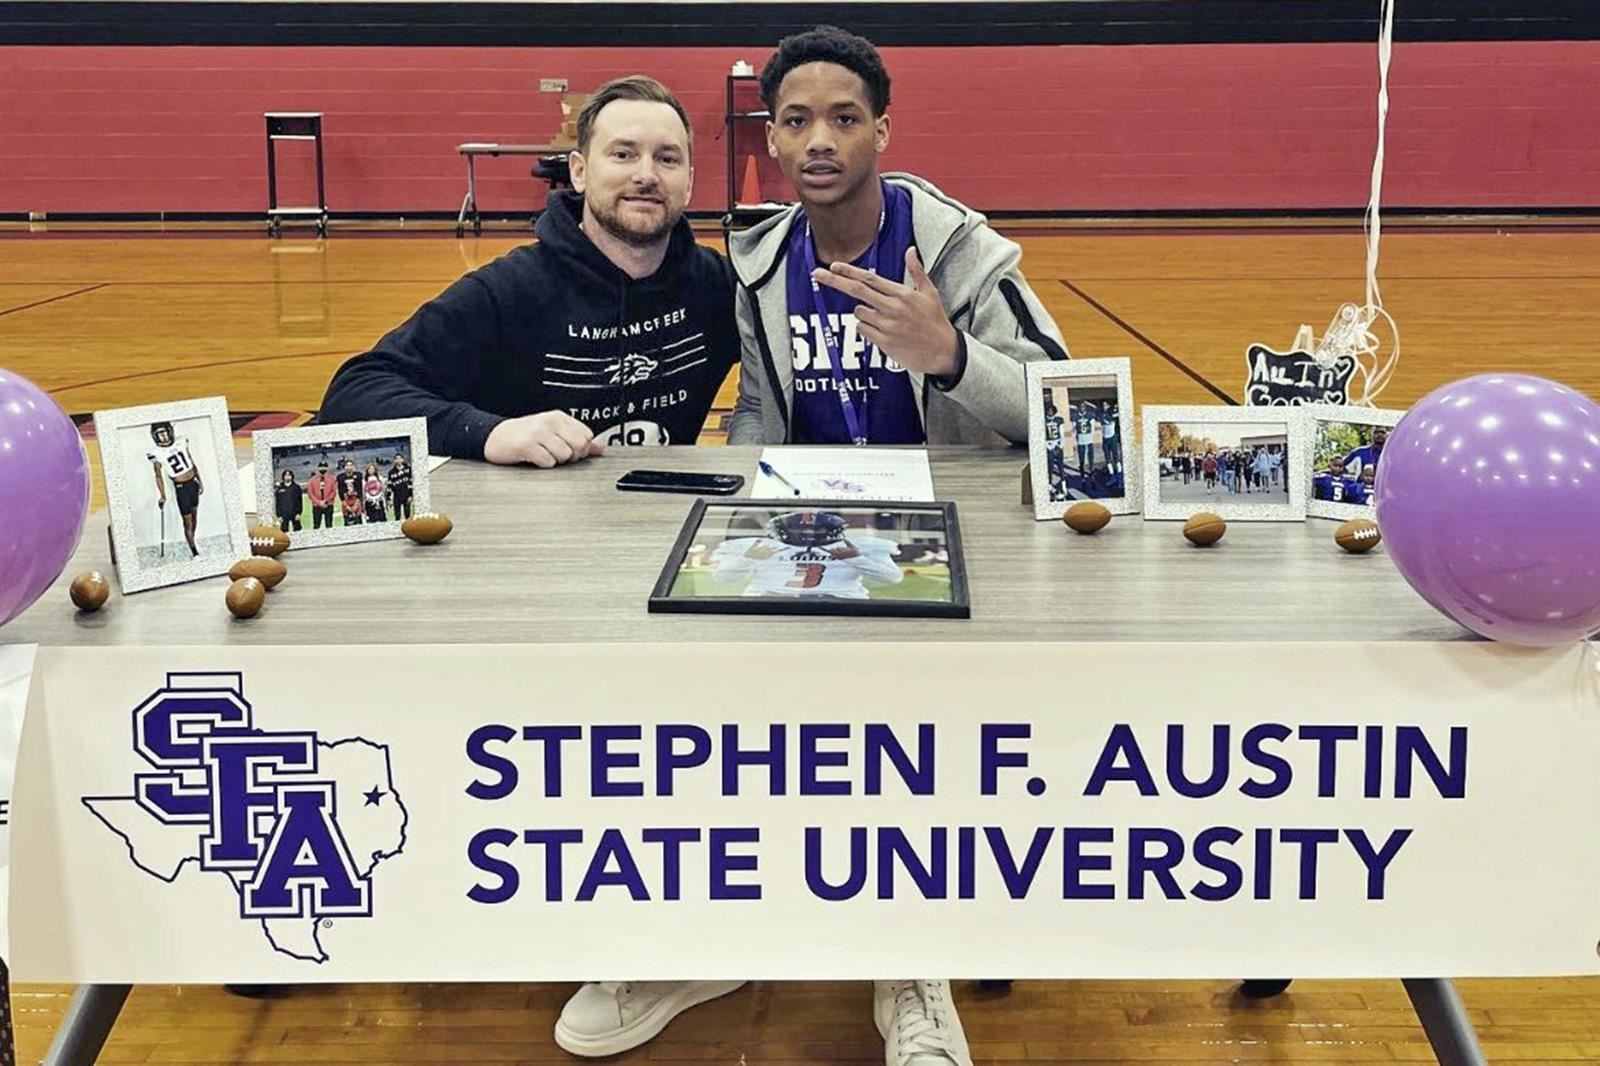 Langham Creek senior Marquese Chapman, right, signed his letter of intent to Stephen F. Austin State University.